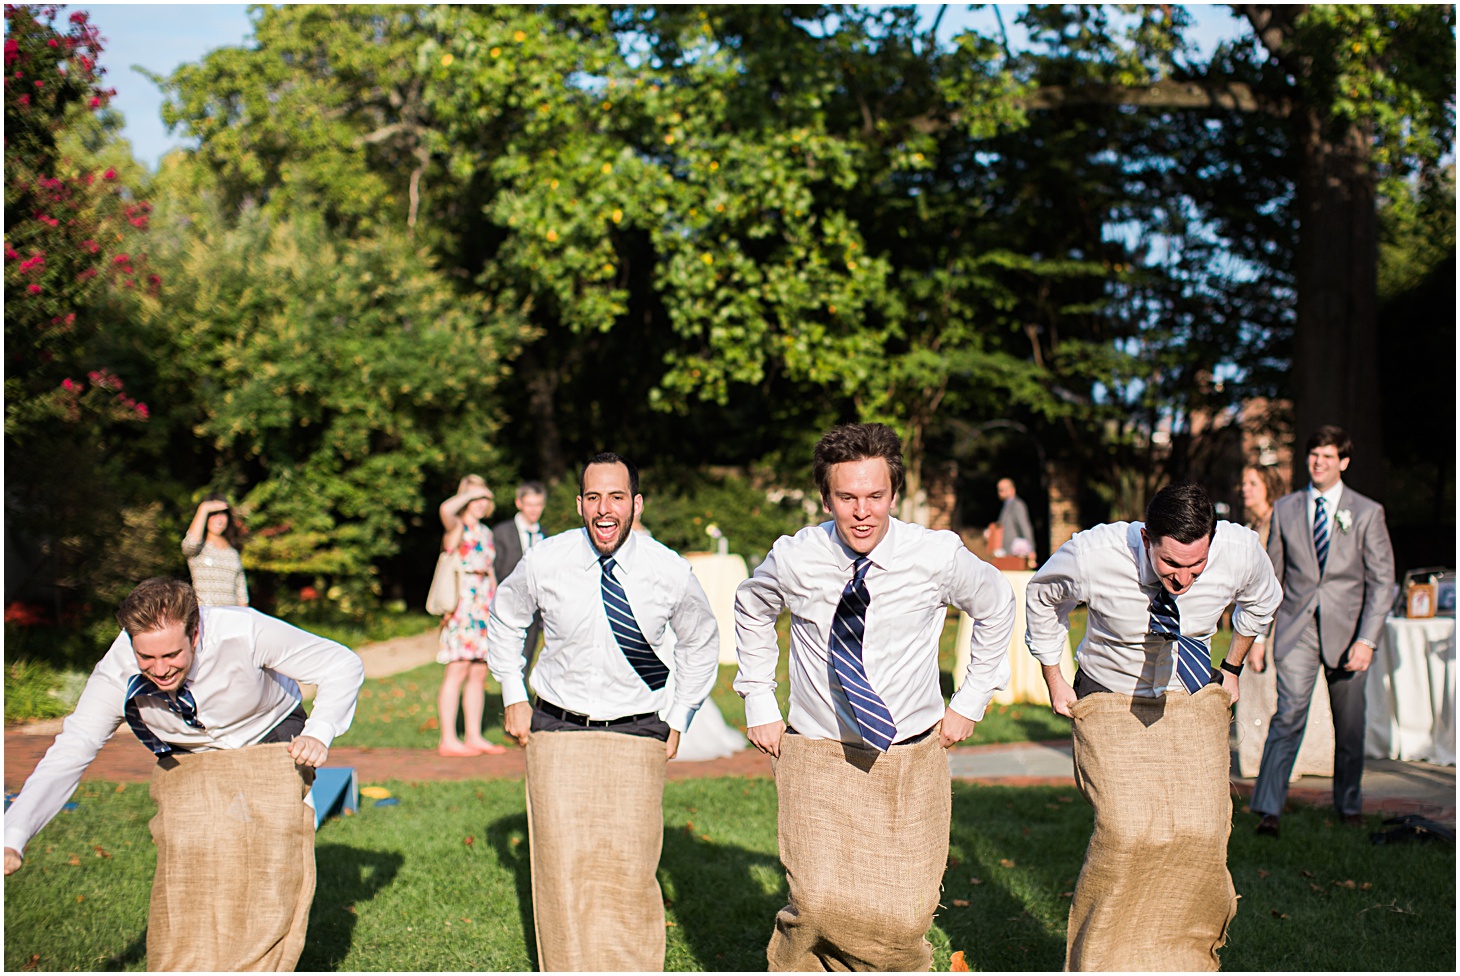 Wedding lawn games | Vintage-Inspired Dumbarton House Wedding in Georgetown by Sarah Bradshaw Photography